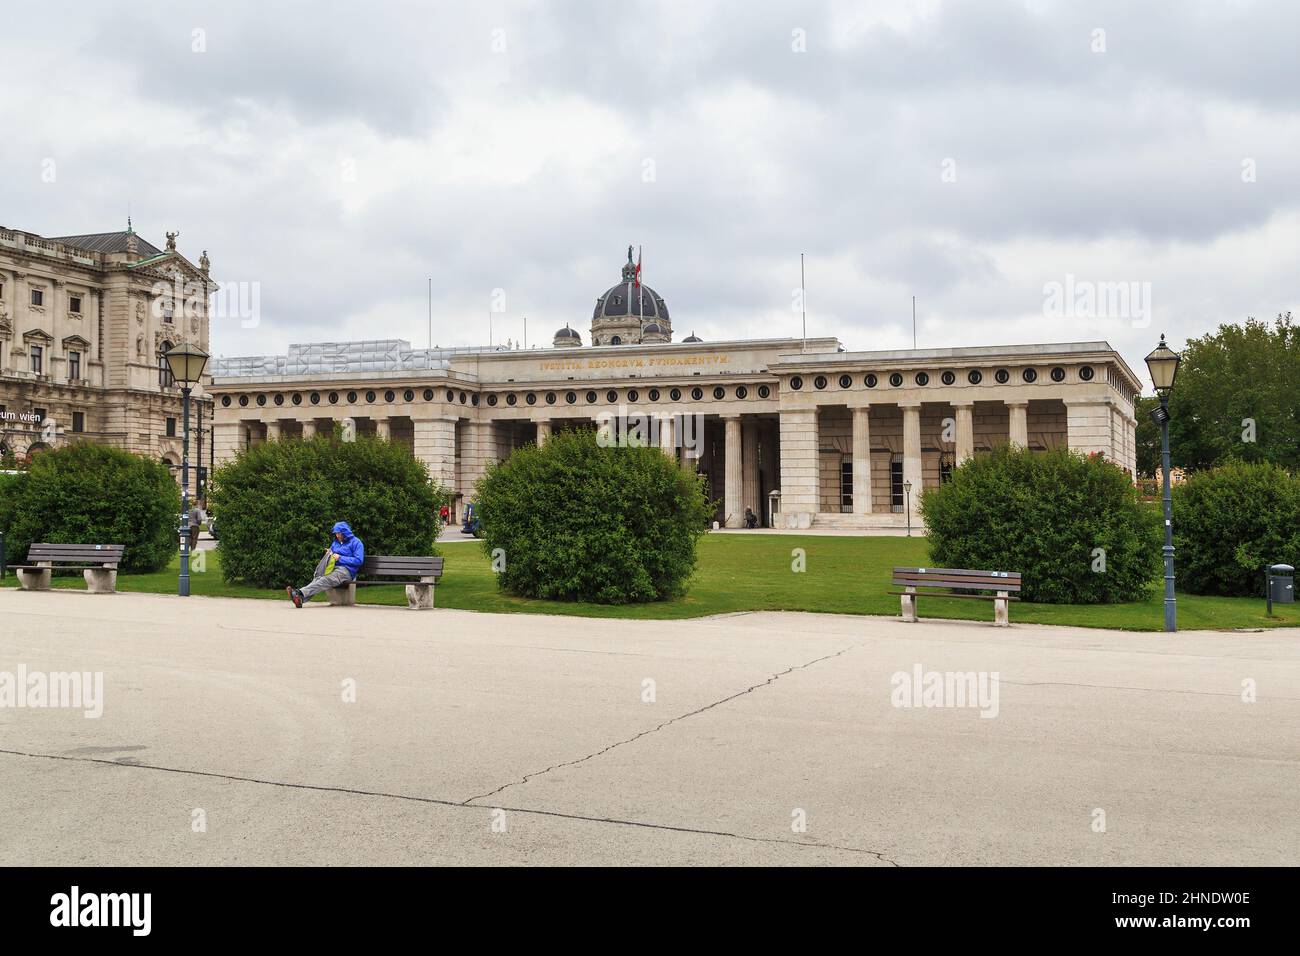 VIENNA, AUSTRIA - MAY 15, 2019: Heroes Portal is a composition that completes the architectural ensemble of Heldenplatz Square. Stock Photo